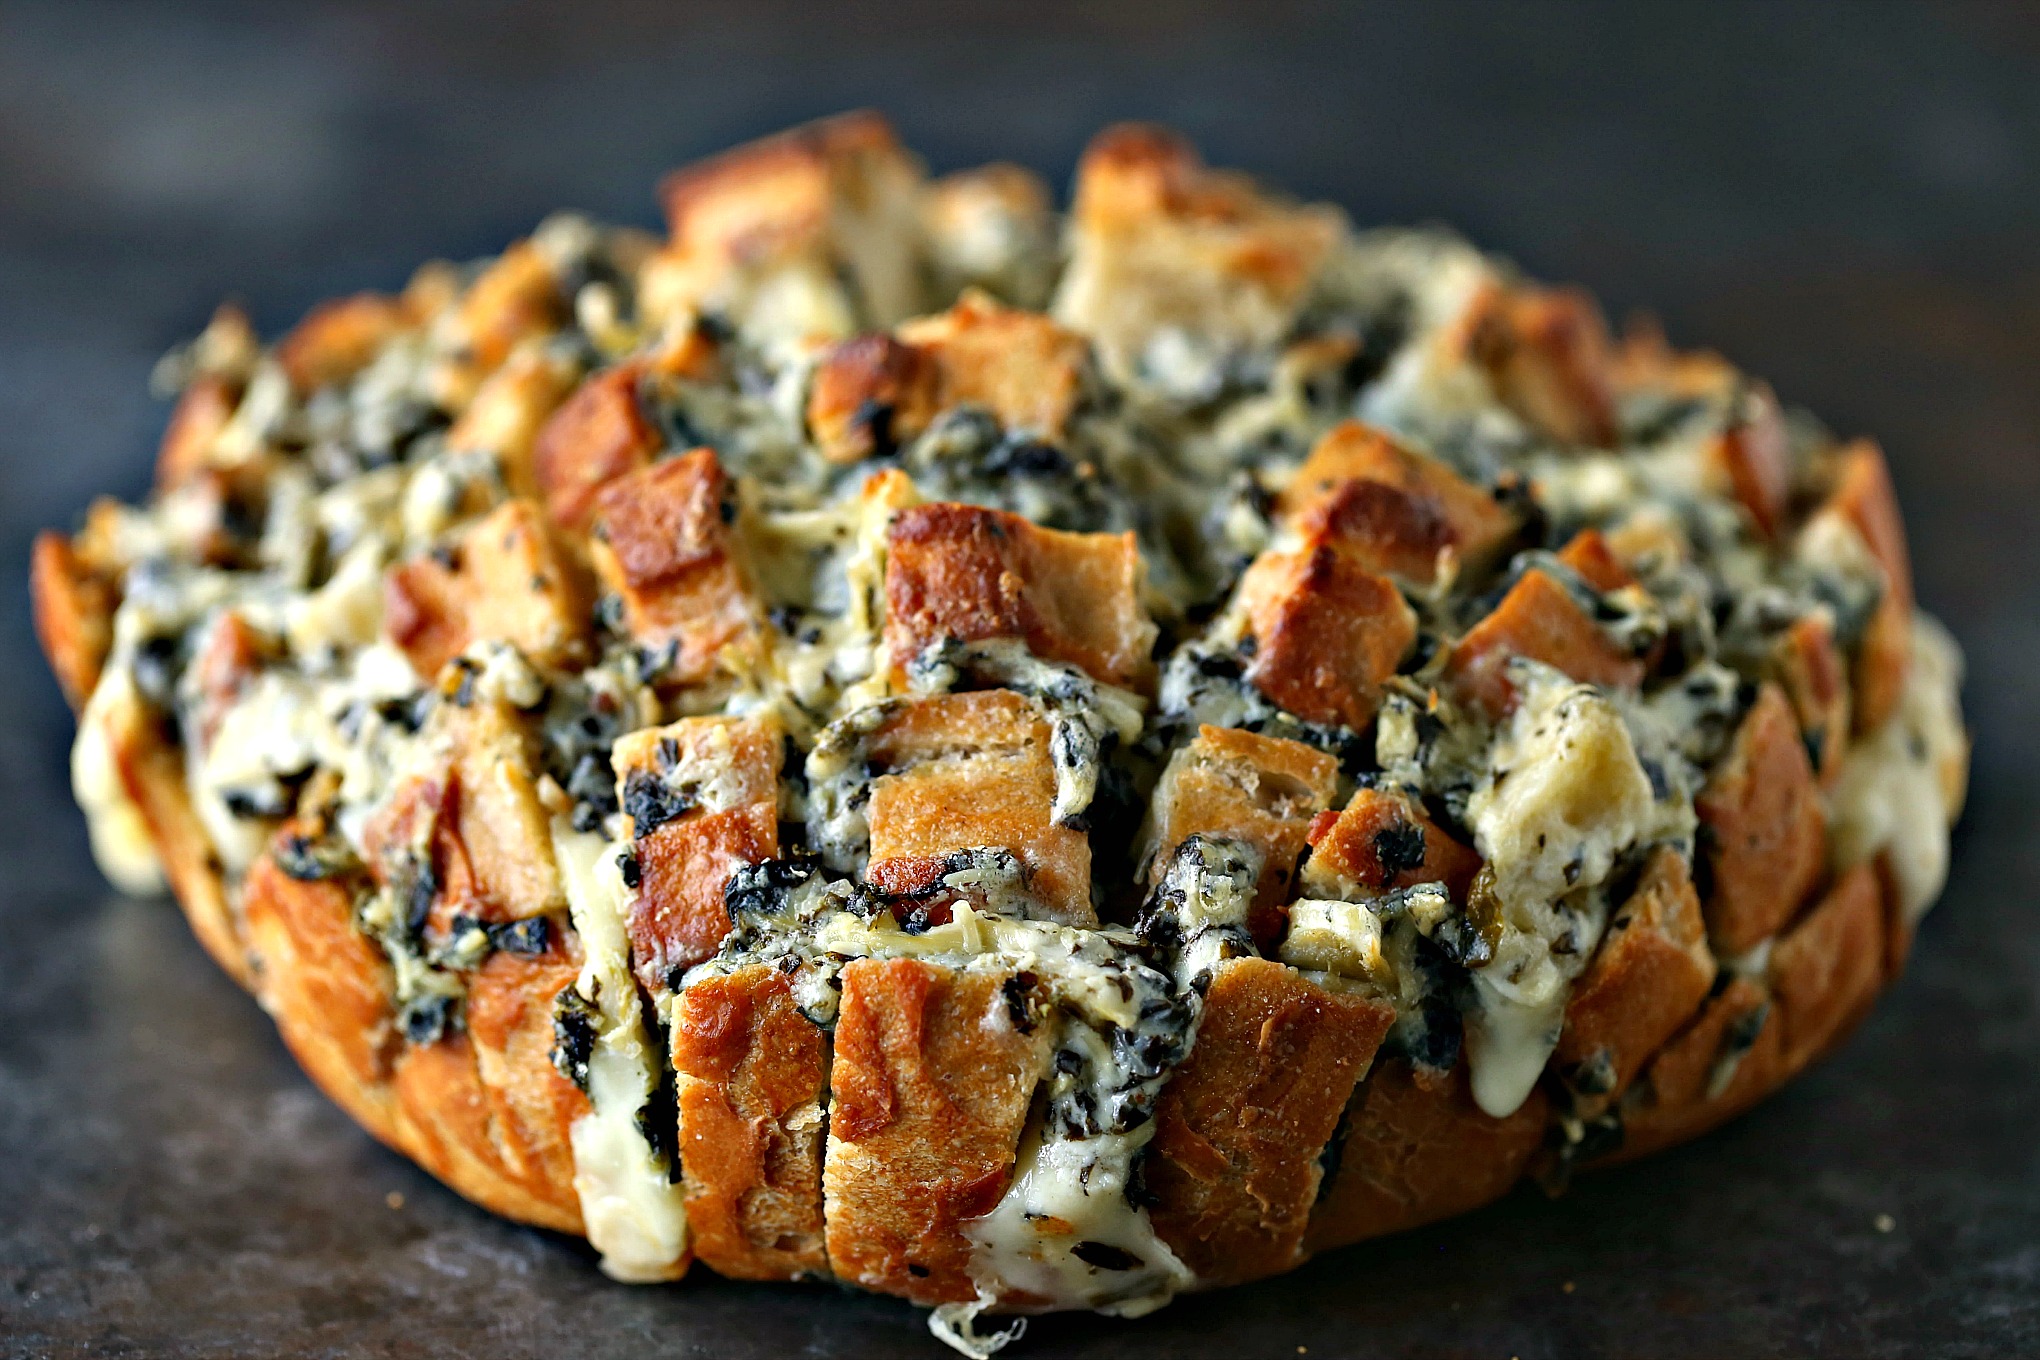 Spinach-Artichoke Cheesy Bread from cravingsofalunatic.com- This recipe is chock full of flavor yet remarkably easy to make. The bread is stuffed with spinach artichoke dip and cheese. You need to make this bread immediately. 